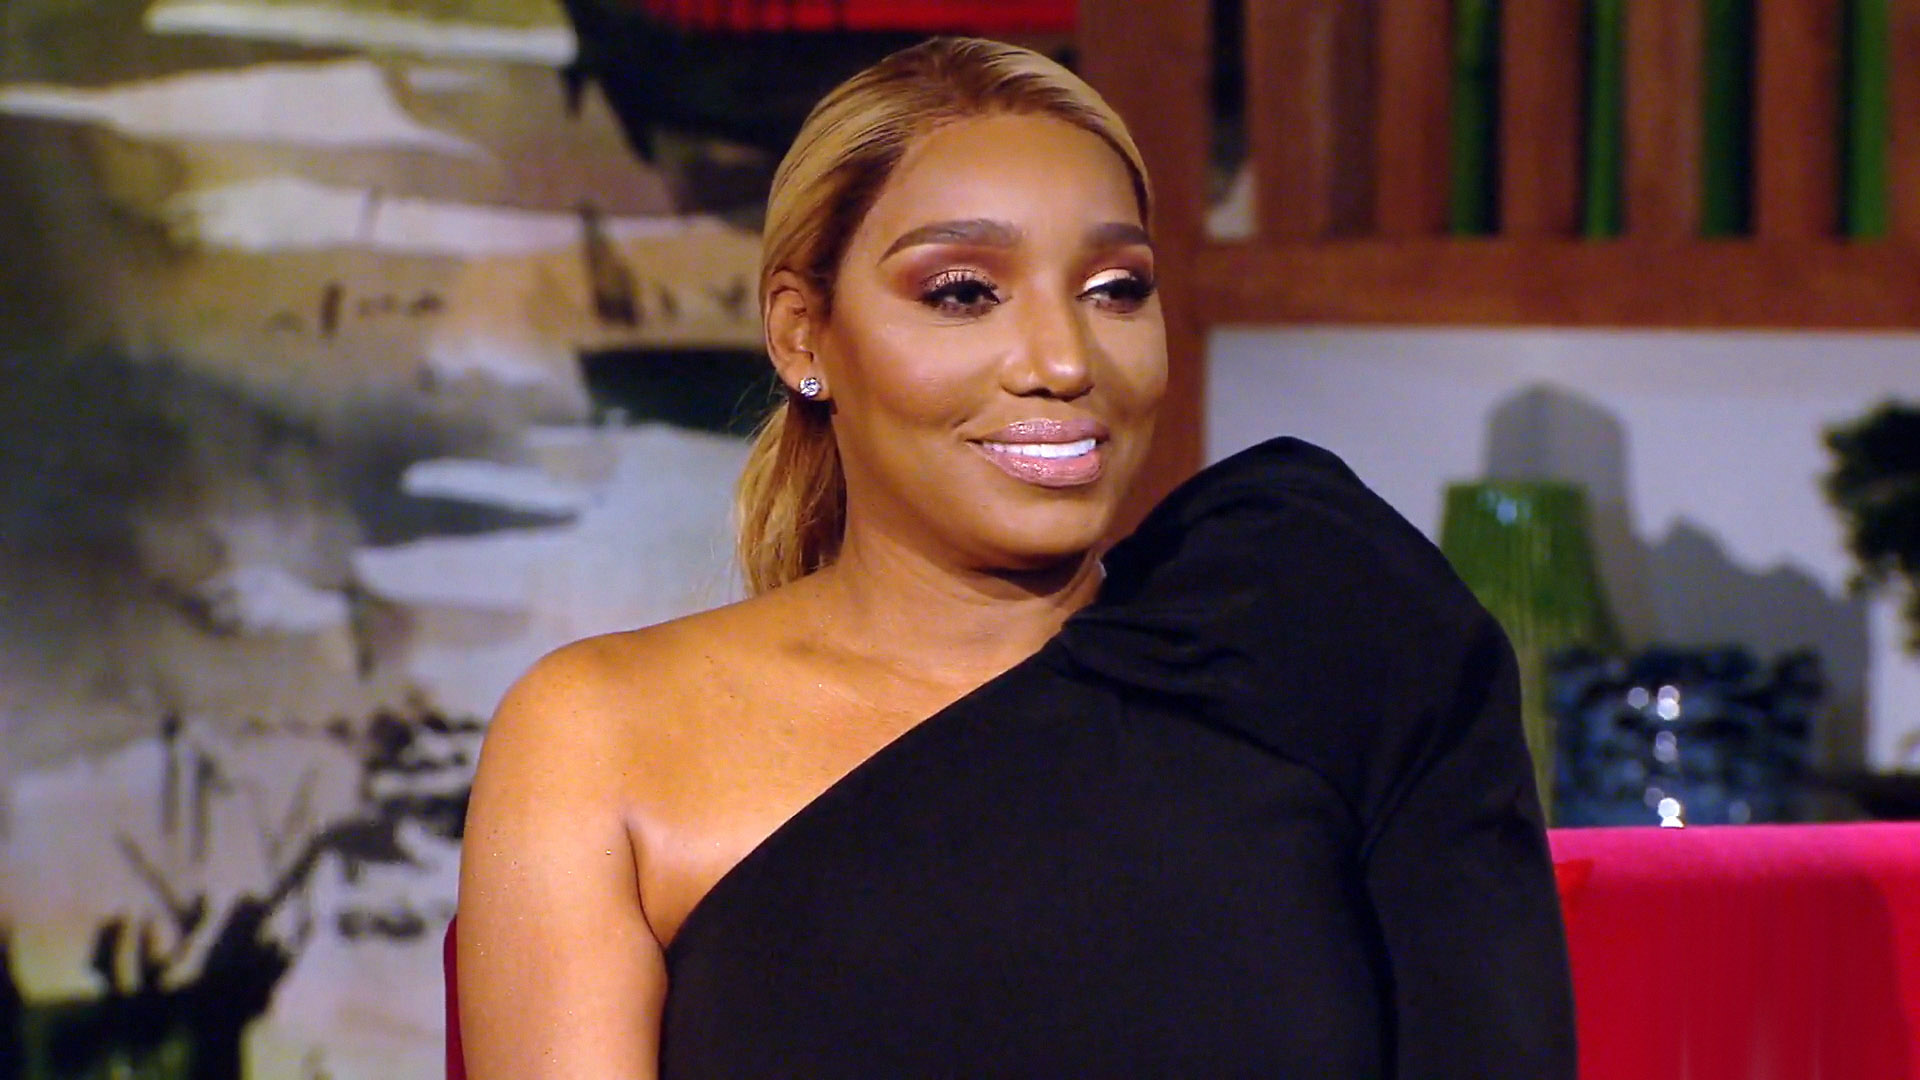 Is There a Chance NeNe Leakes Will Come Back to Real Housewives?